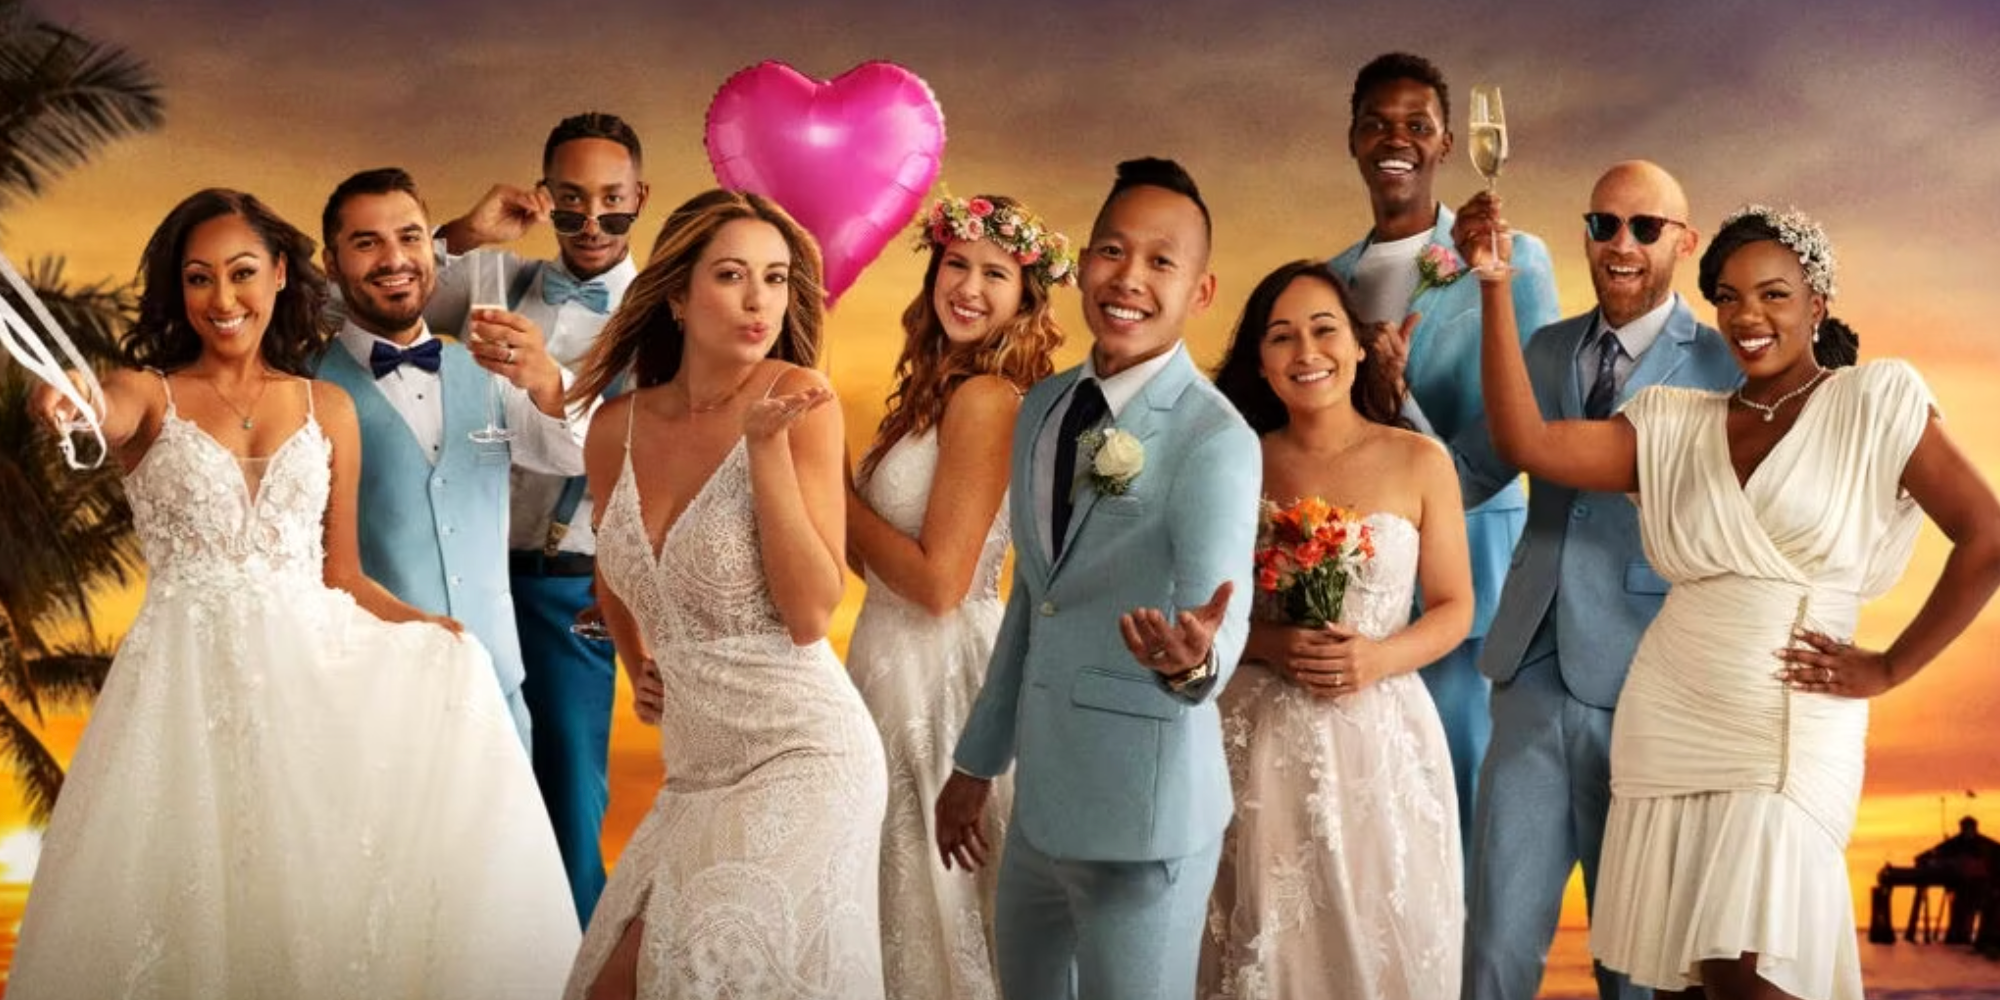 married at first sight season 15 cast all dressed up and posed for promo shot